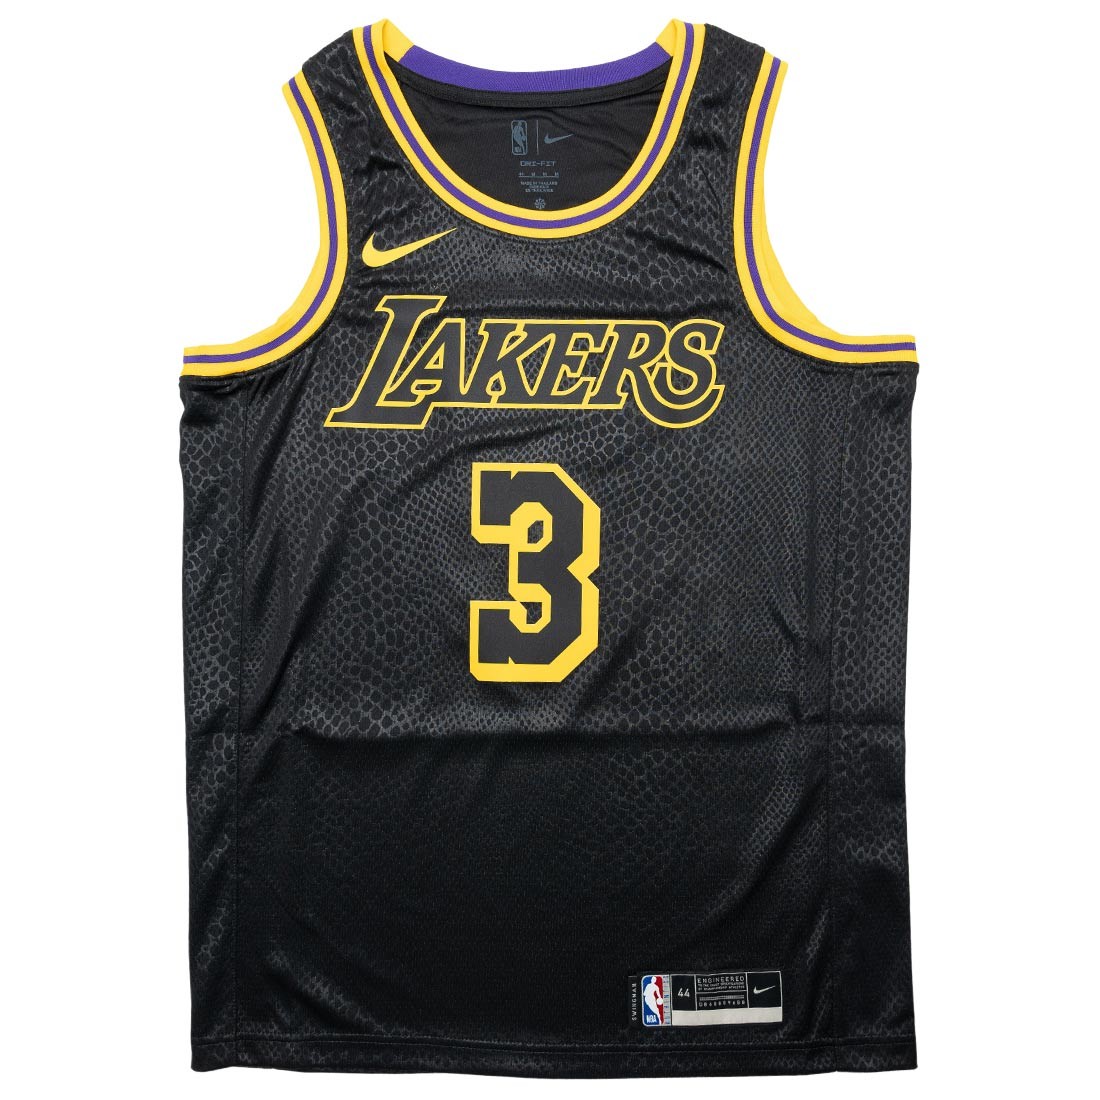 blacked out nba jersey